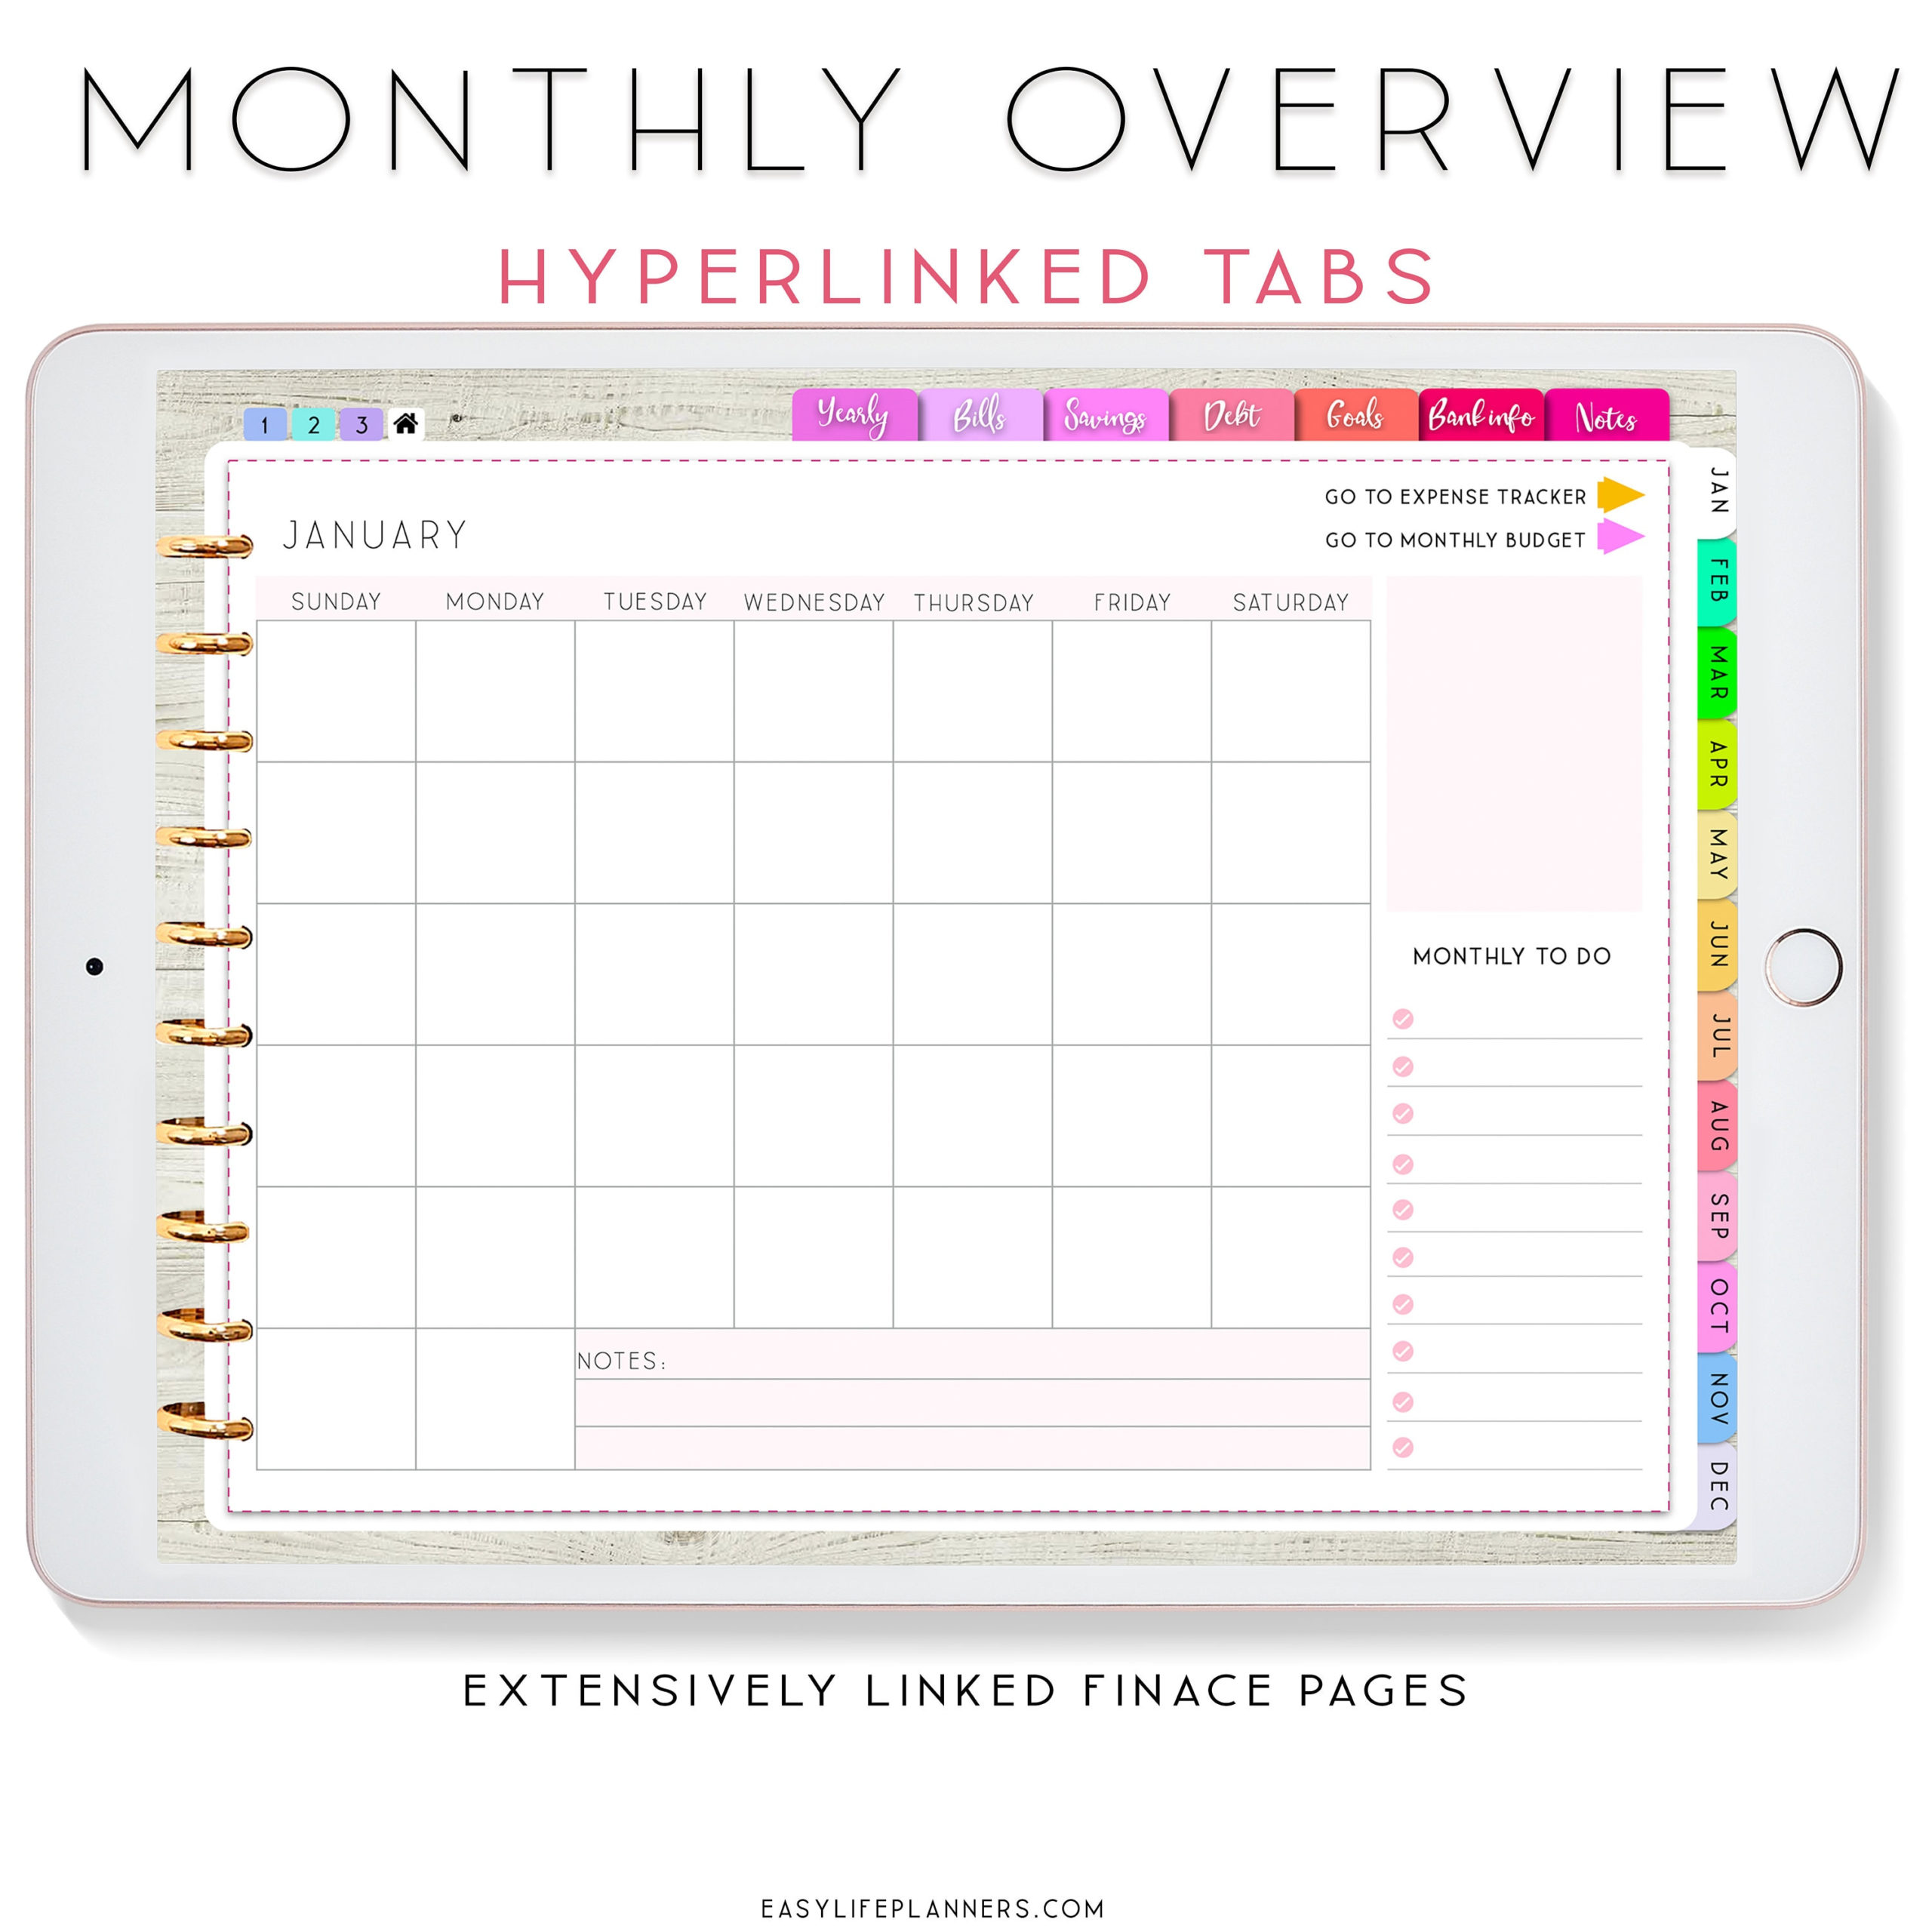 Digital Planner, Goodnotes Planner, Ipad Planner pertaining to Free Budget Planner Template Ipad